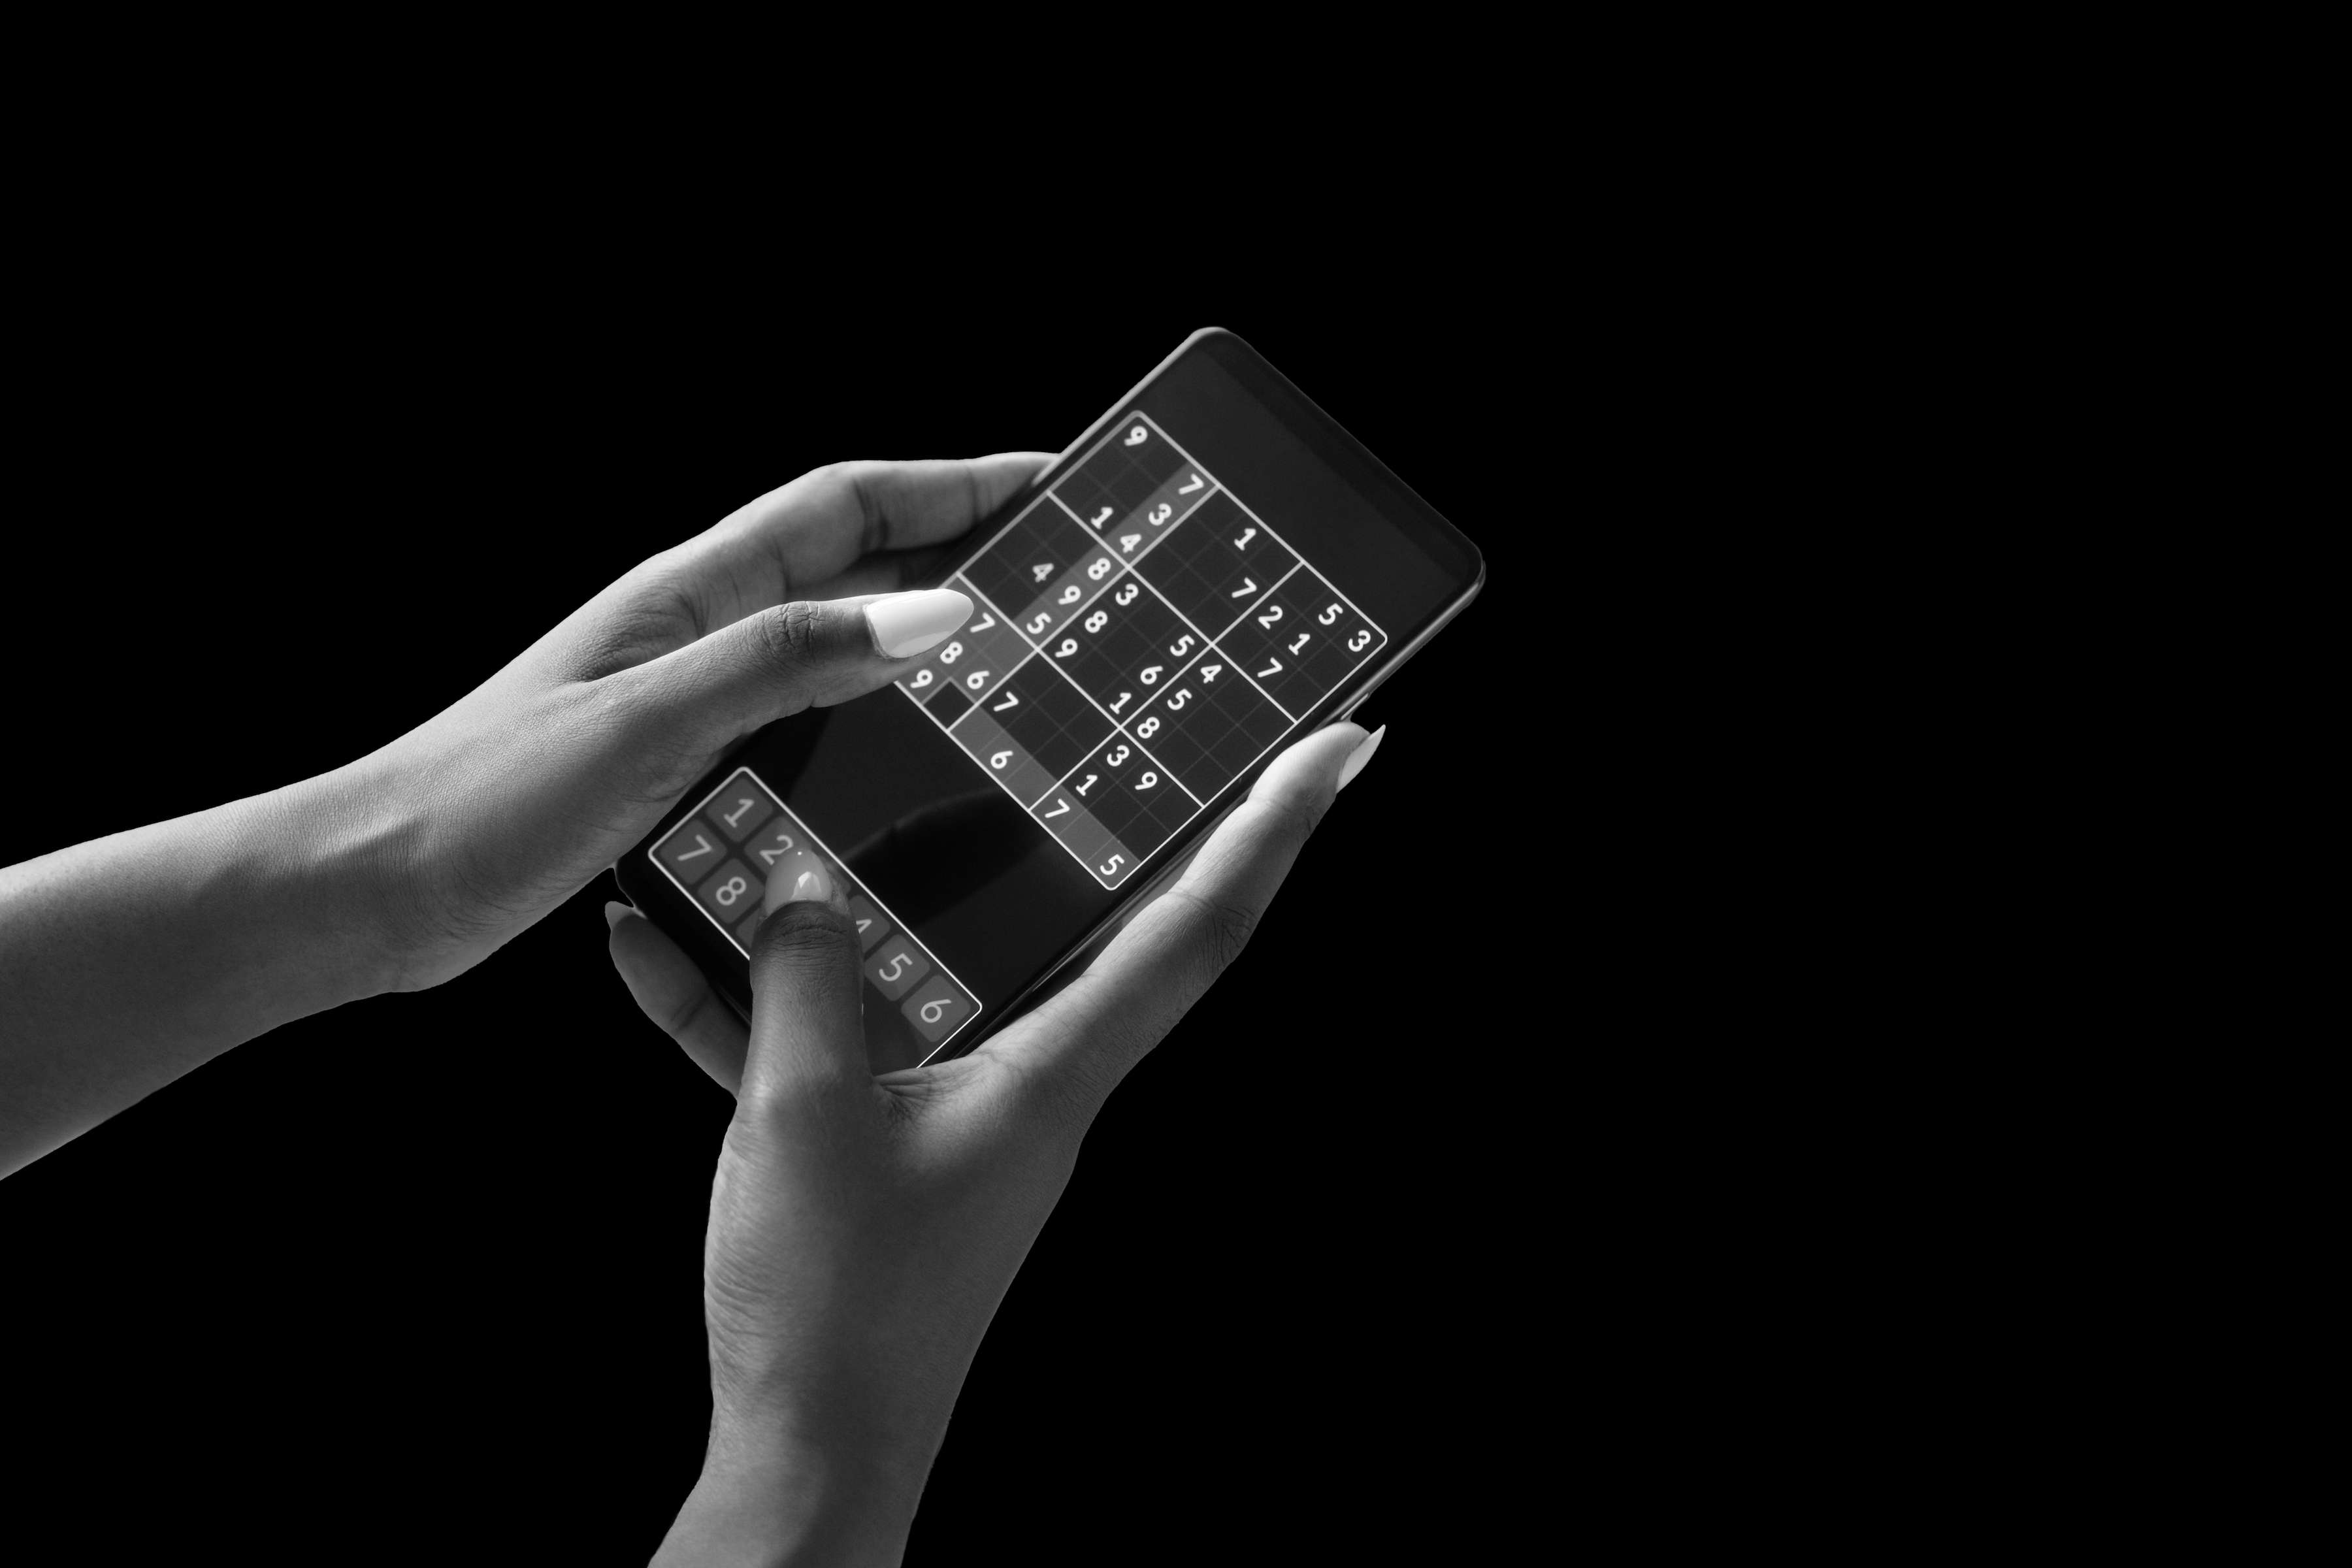 Black and white image of a woman's phone playing a game